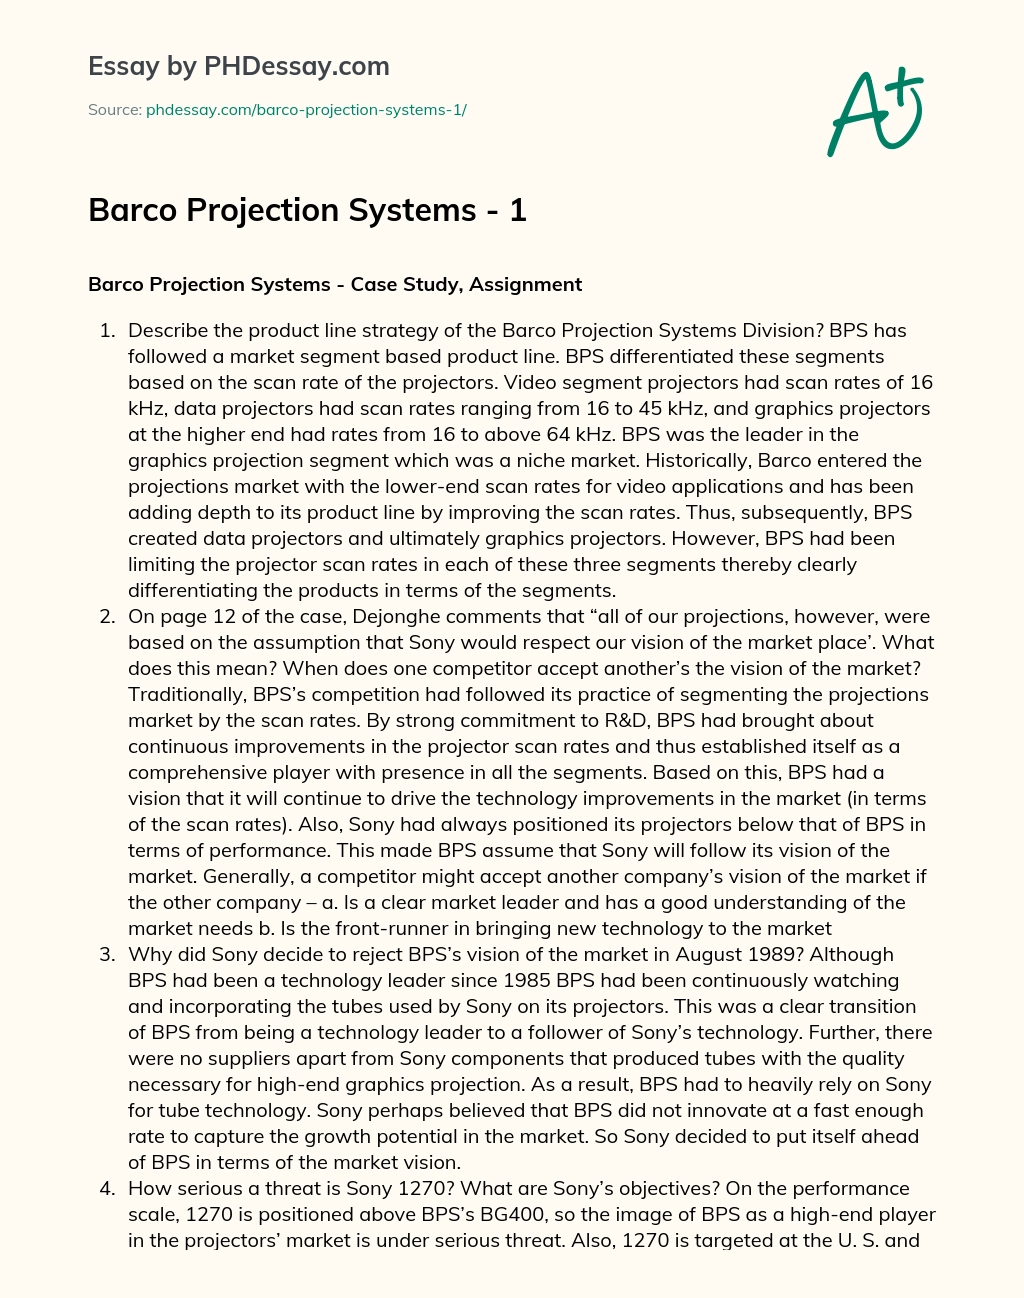 Barco Projection Systems – 1 essay